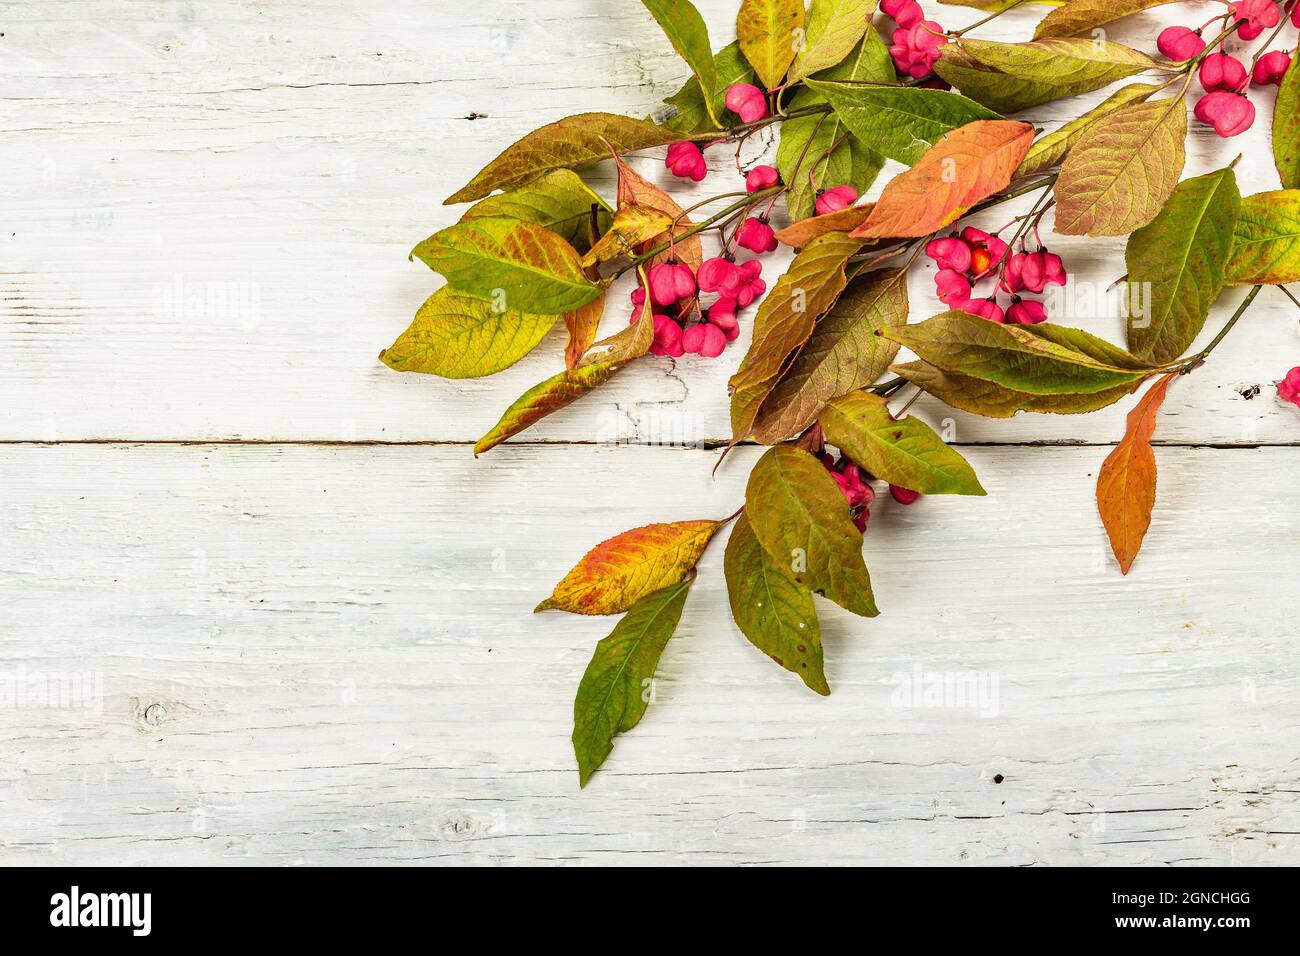 Wreath from Euonymus europaeus a white wooden background. Autumn frame decorative composition with toxic fruits, orange seeds, and fall colorful leave Stock Photo